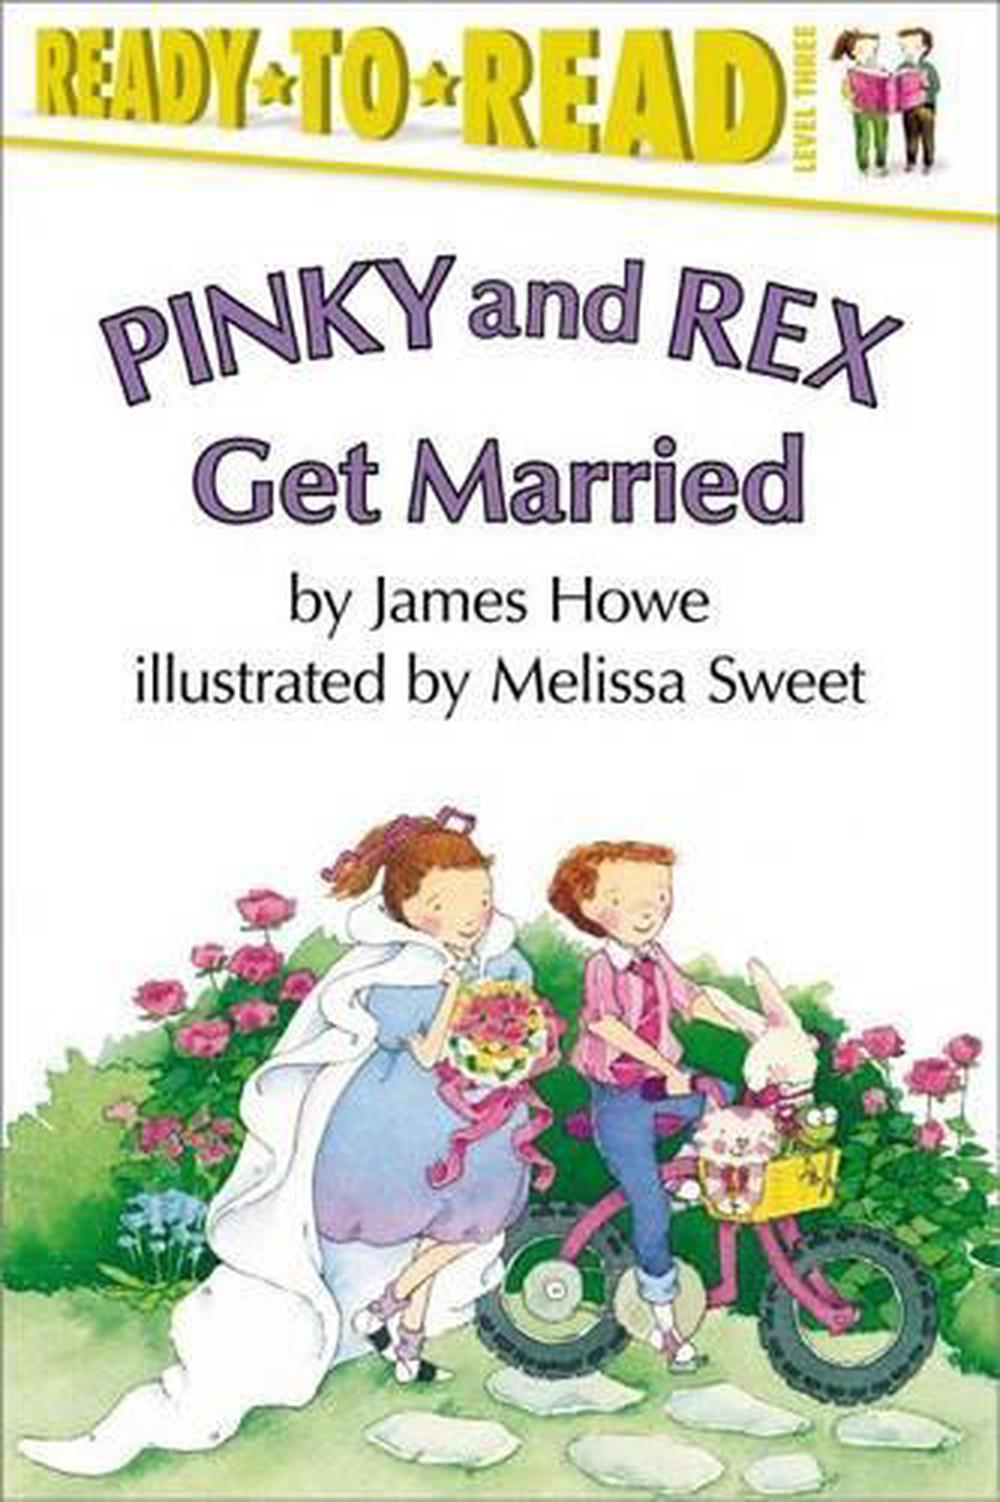 Pinky and Rex by James Howe